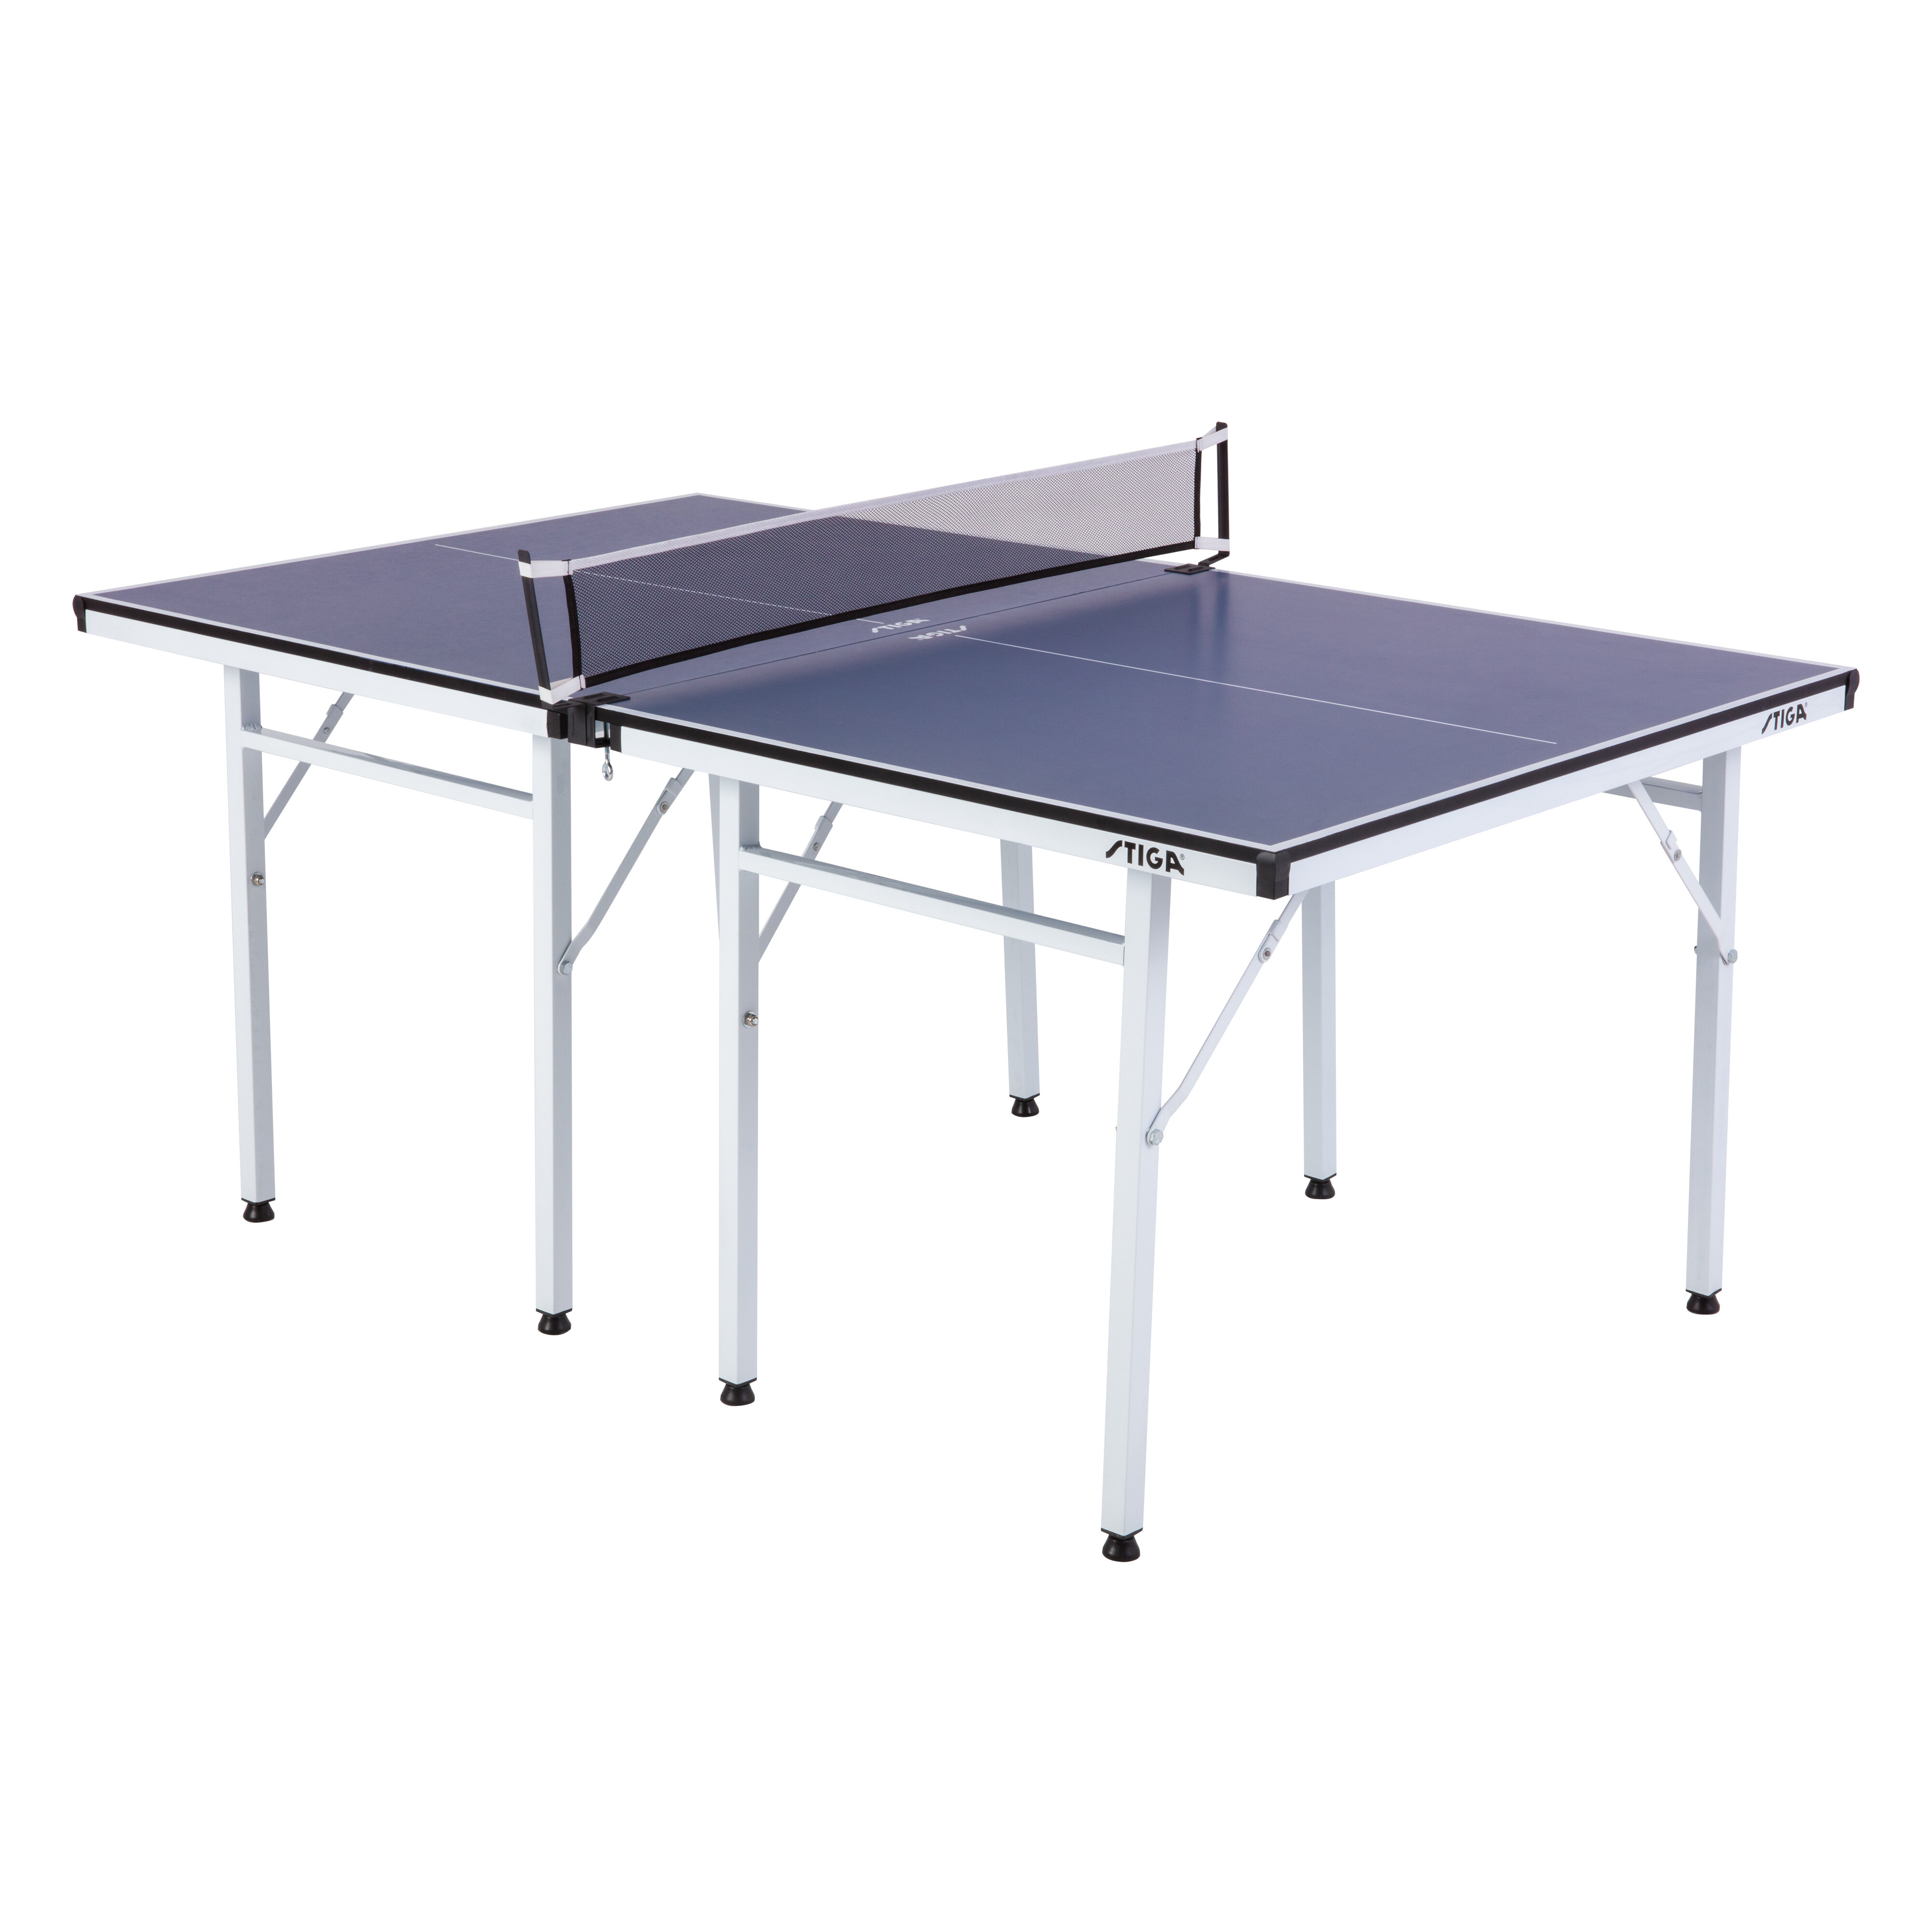 Dione Indoor Table Tennis Table S400i School Sport Compact Full Size Foldable Ping Pong Easy Assembly Grey 70KG